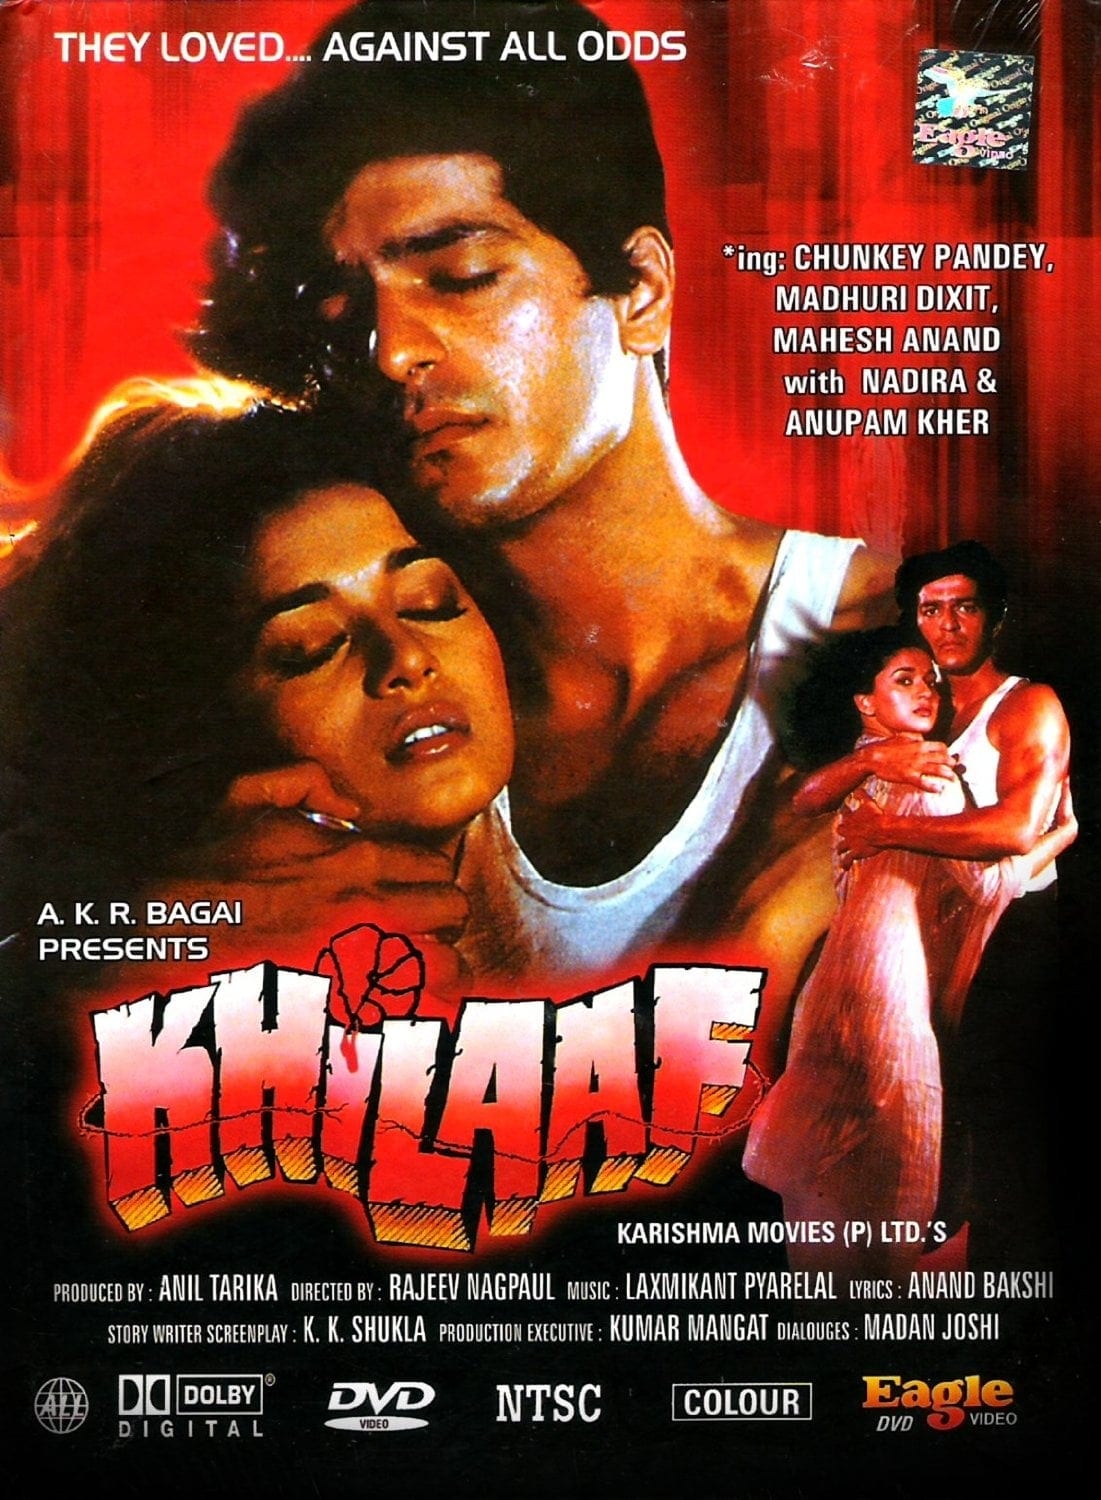 Poster for the movie "Khilaaf"